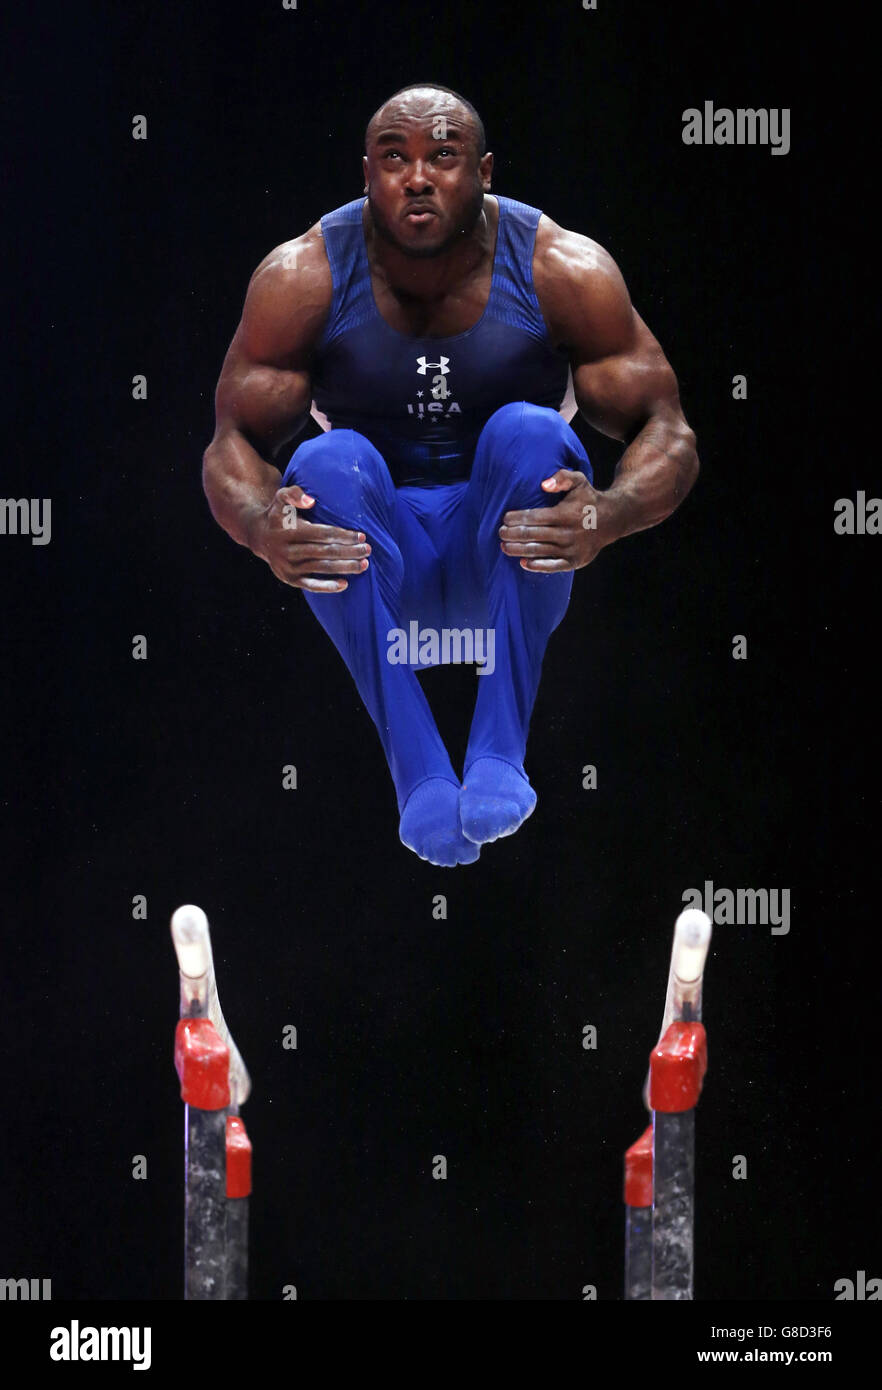 USA's Donnell Whittenburg competes on the Parallel Bars during day four of the 2015 World Gymnastic Championships at The SSE Hydro, Glasgow. Stock Photo